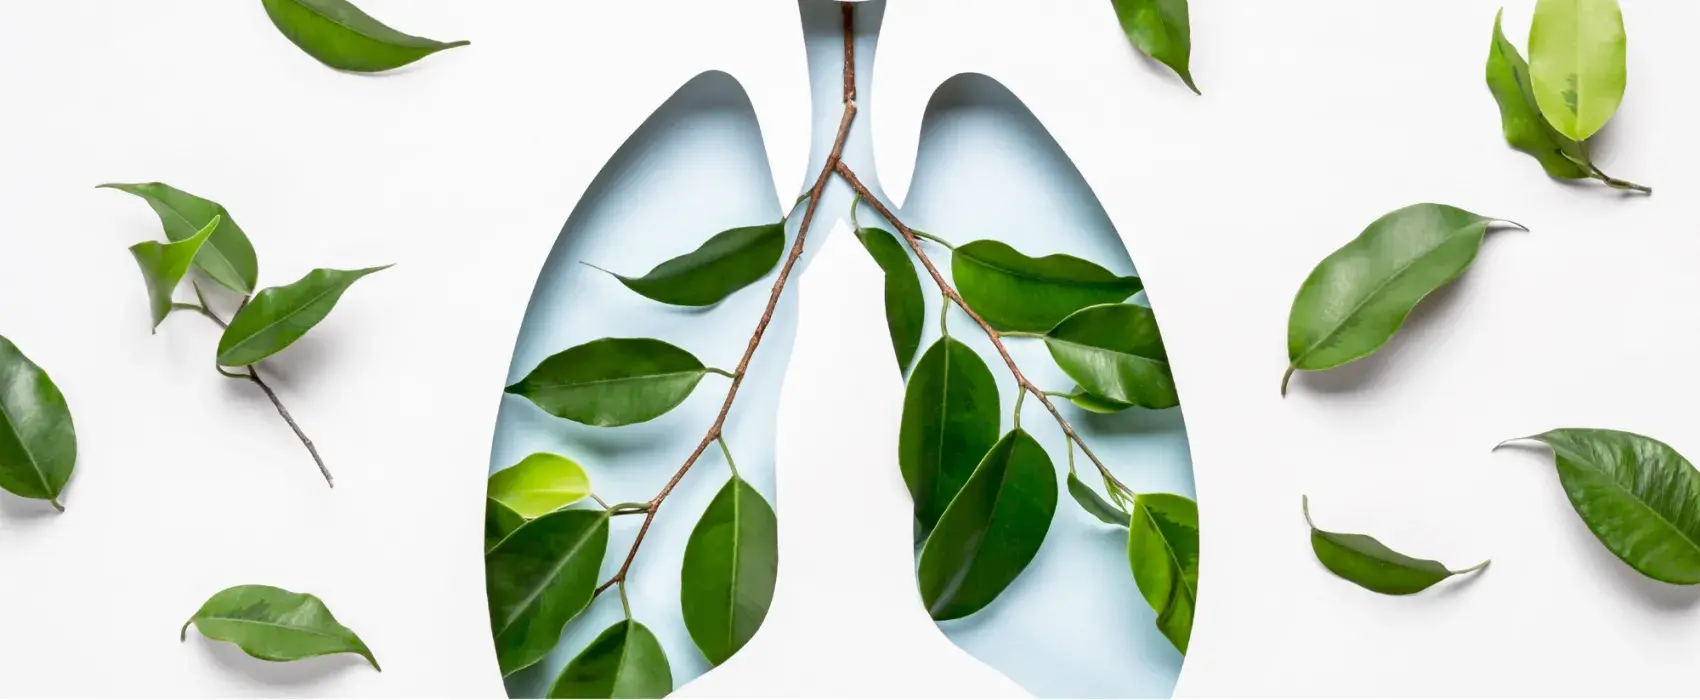 Lung graphic with leaves